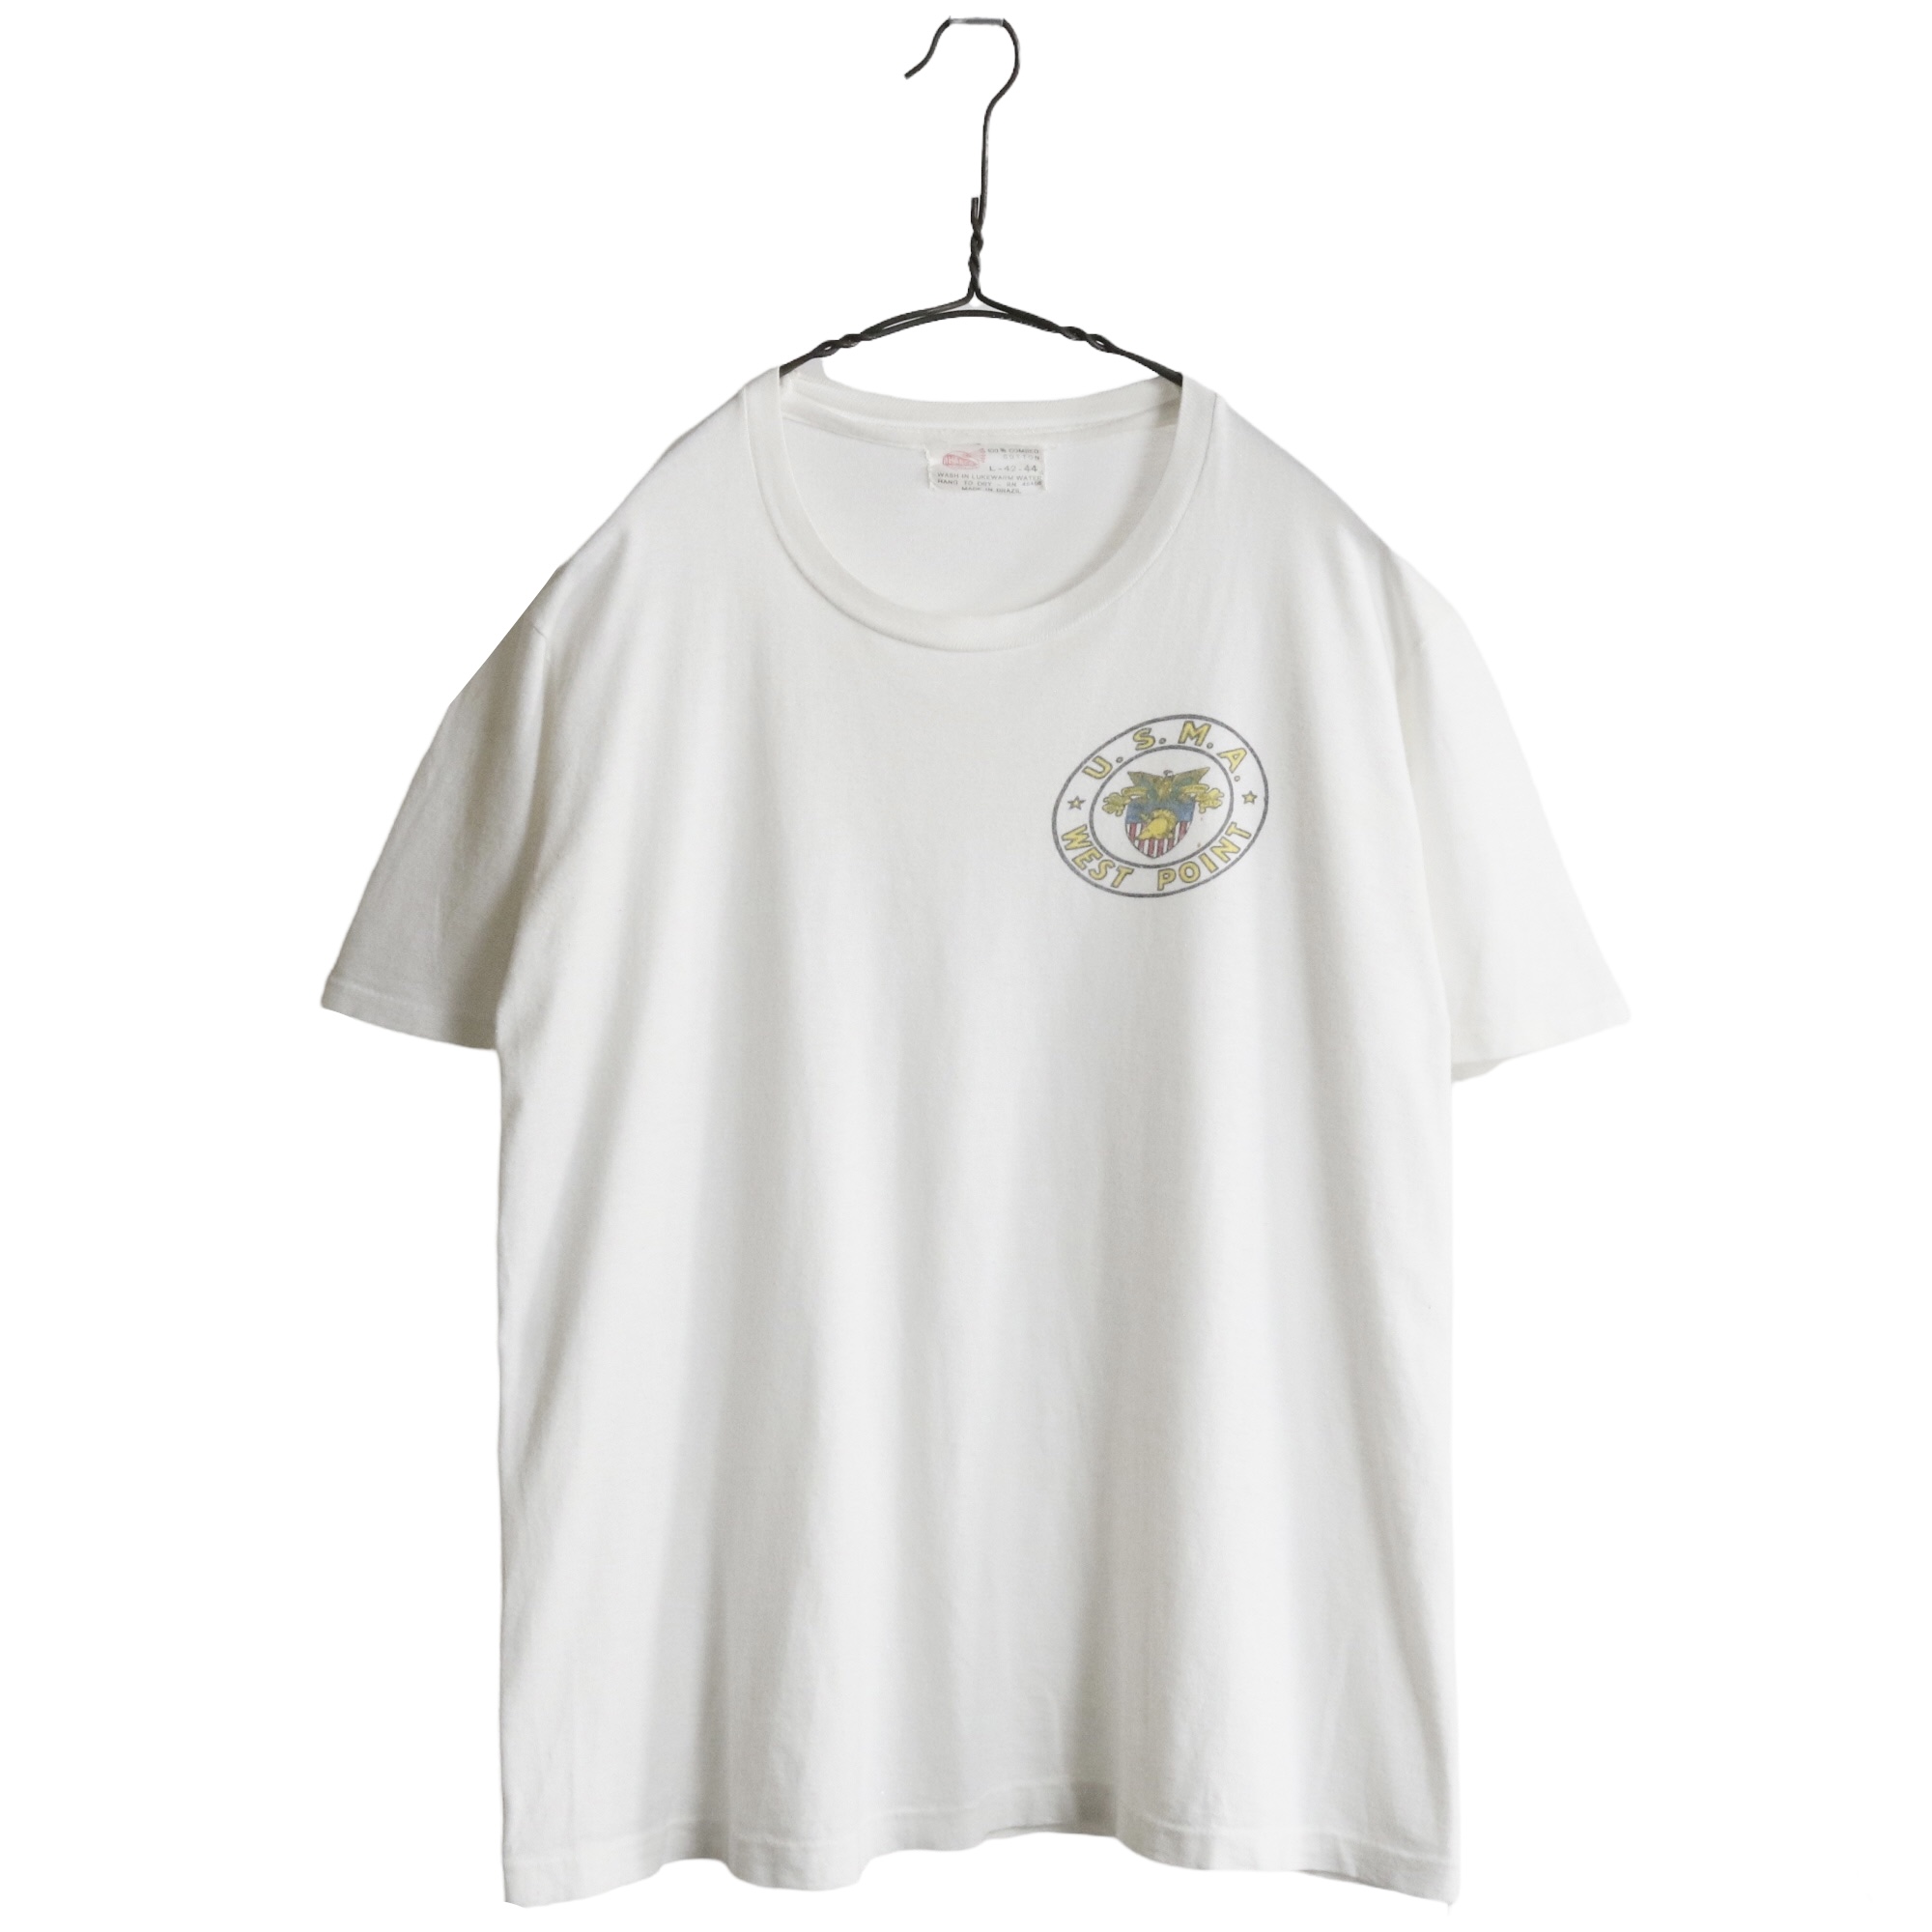 60s70s ヴィンテージ USMA WEST POINT Tシャツ ミリタリー 染込み カレッジ L